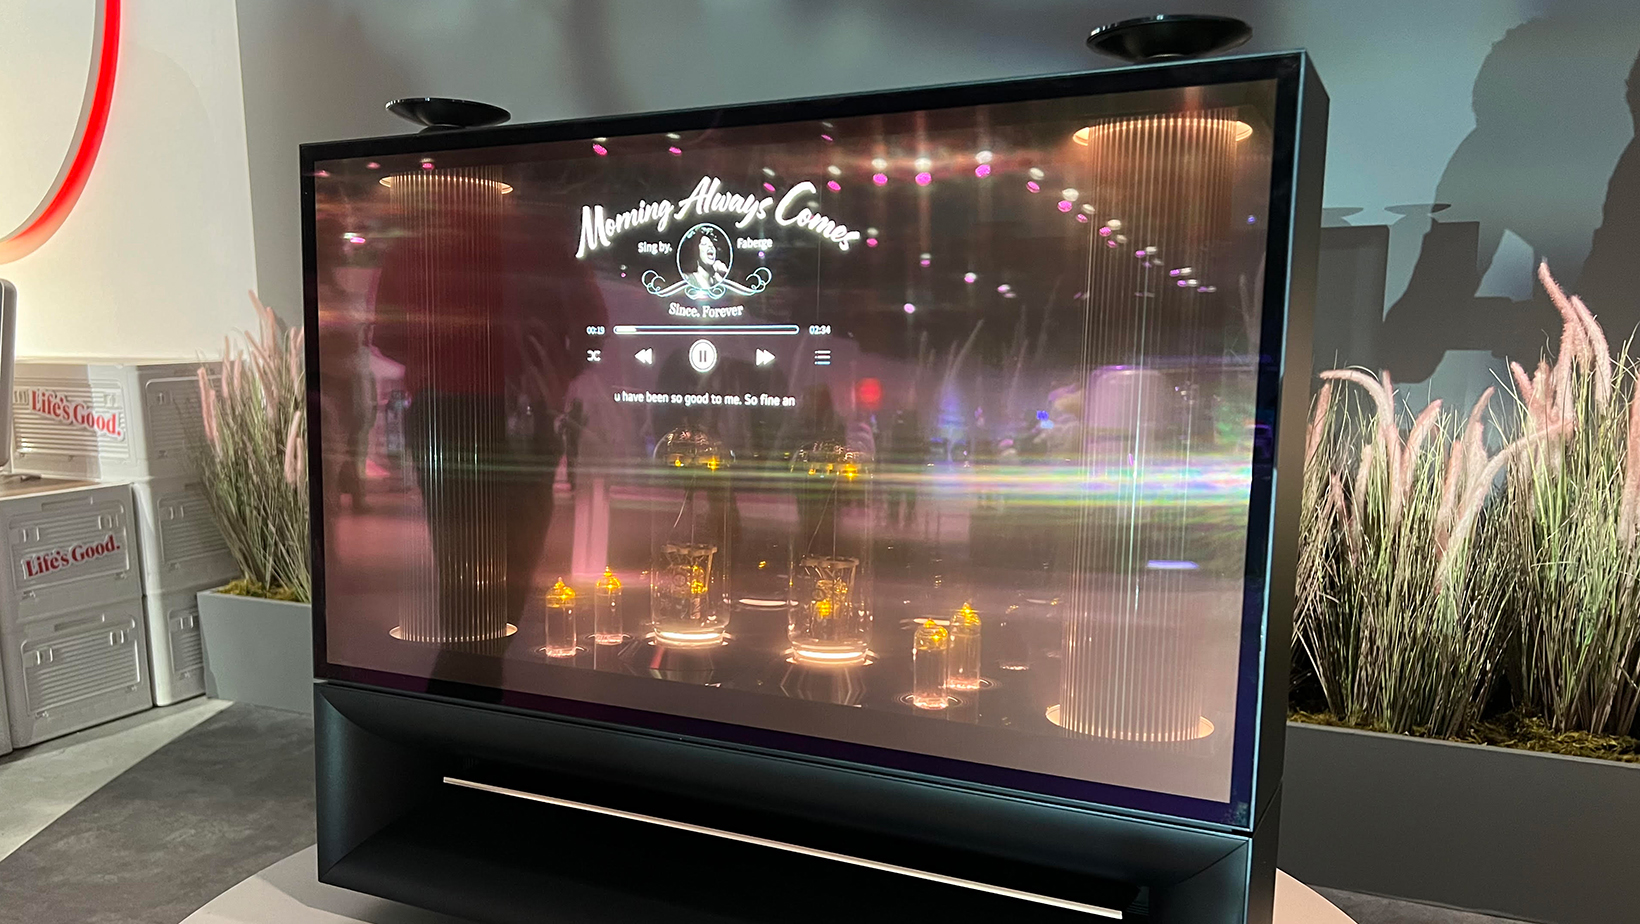 The LG Dukebox speaker/display playing music while showing the vacuum tubes through the transparent screen.